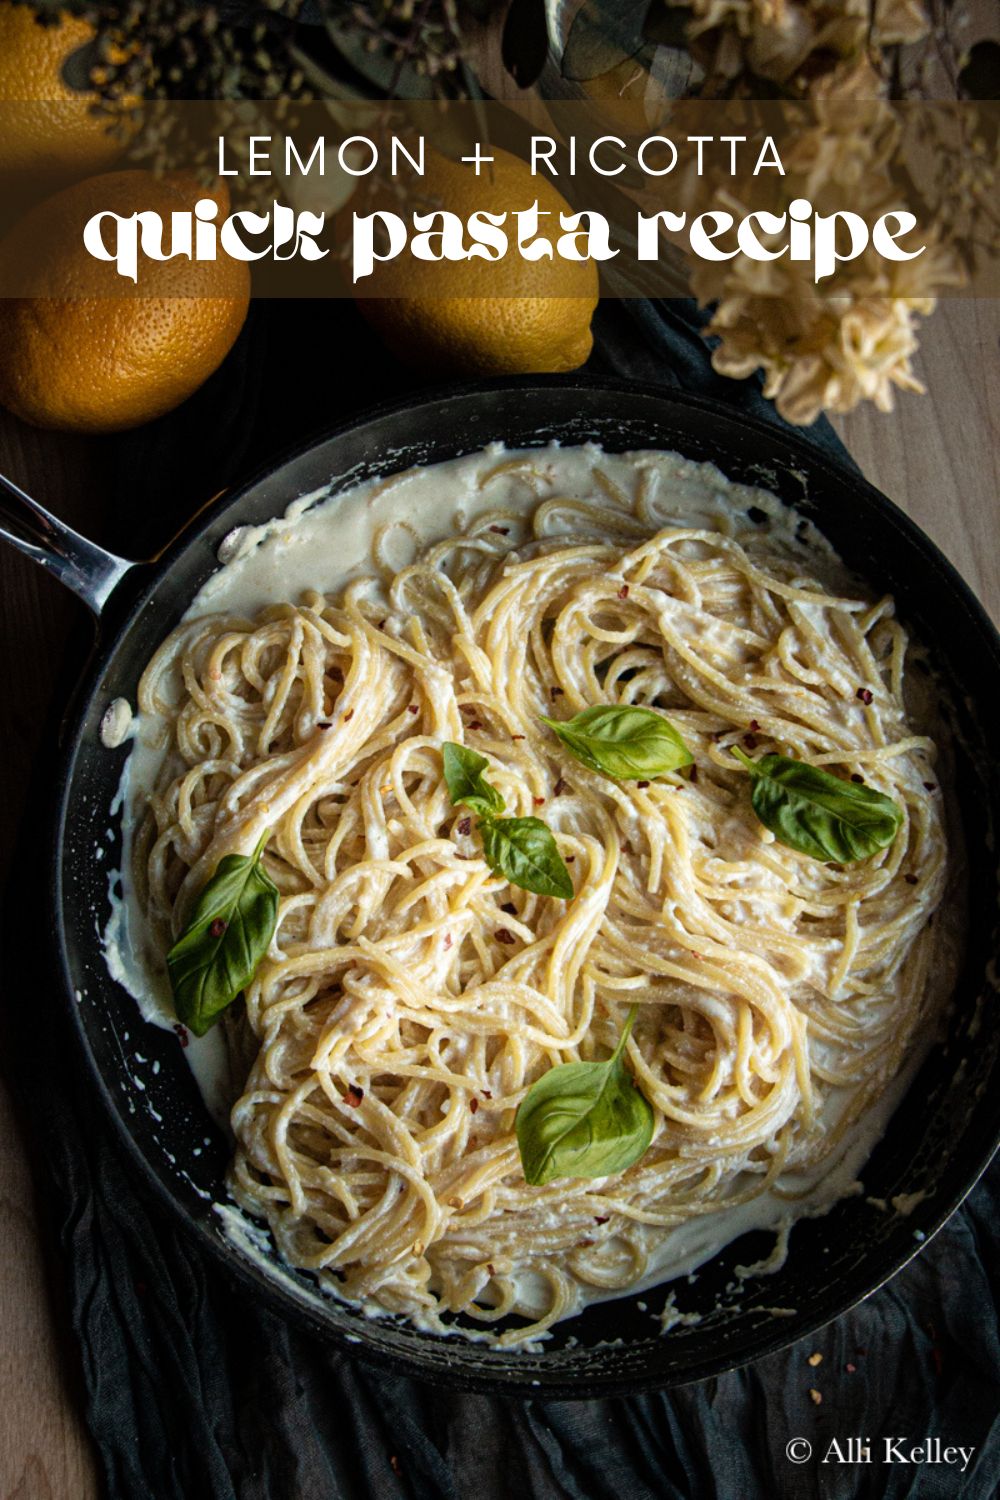 For a quick meal that is simple yet scrumptious - you have to try this lemon ricotta pasta! The sweet, zesty lemon flavor combined with creamy ricotta cheese is a match made in heaven. Plus, this dish is effortless to make and is the best way to spruce up a boring weeknight meal!